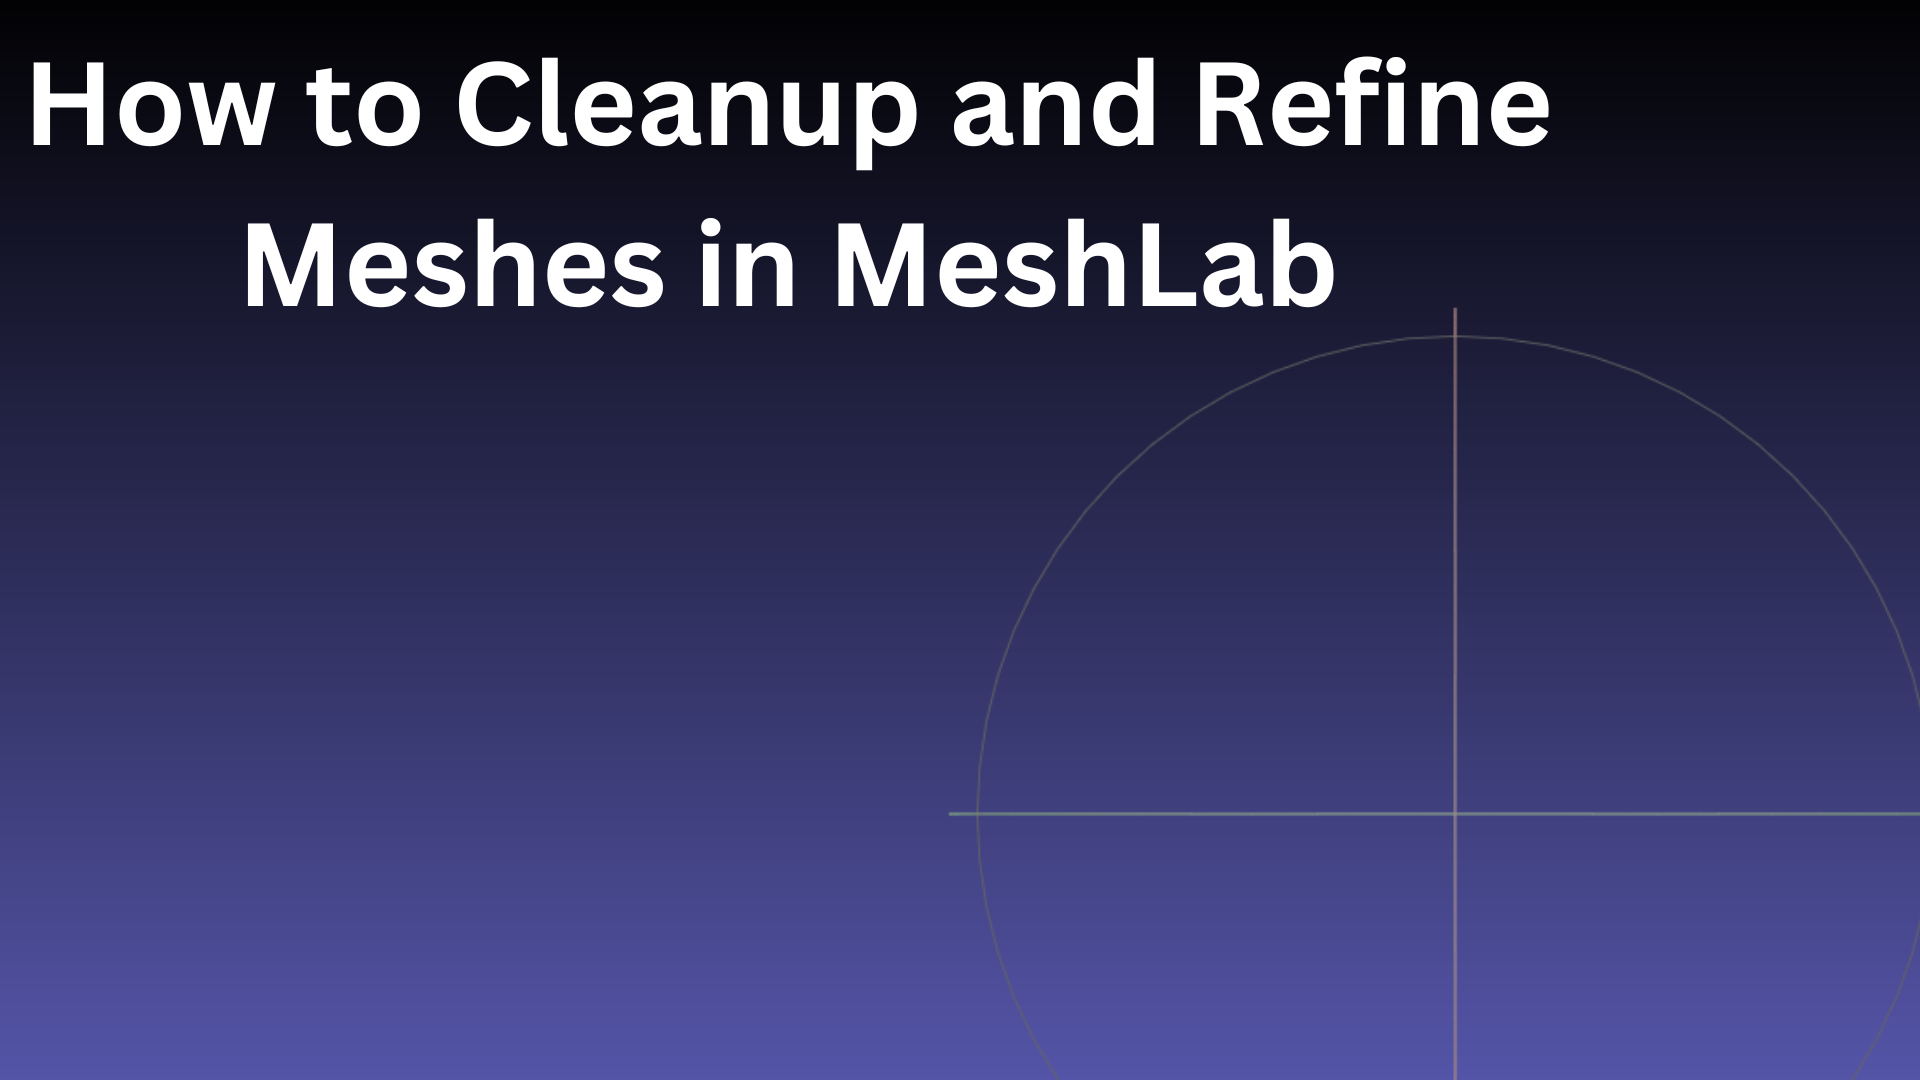 How to Cleanup and Refine Meshes in MeshLab